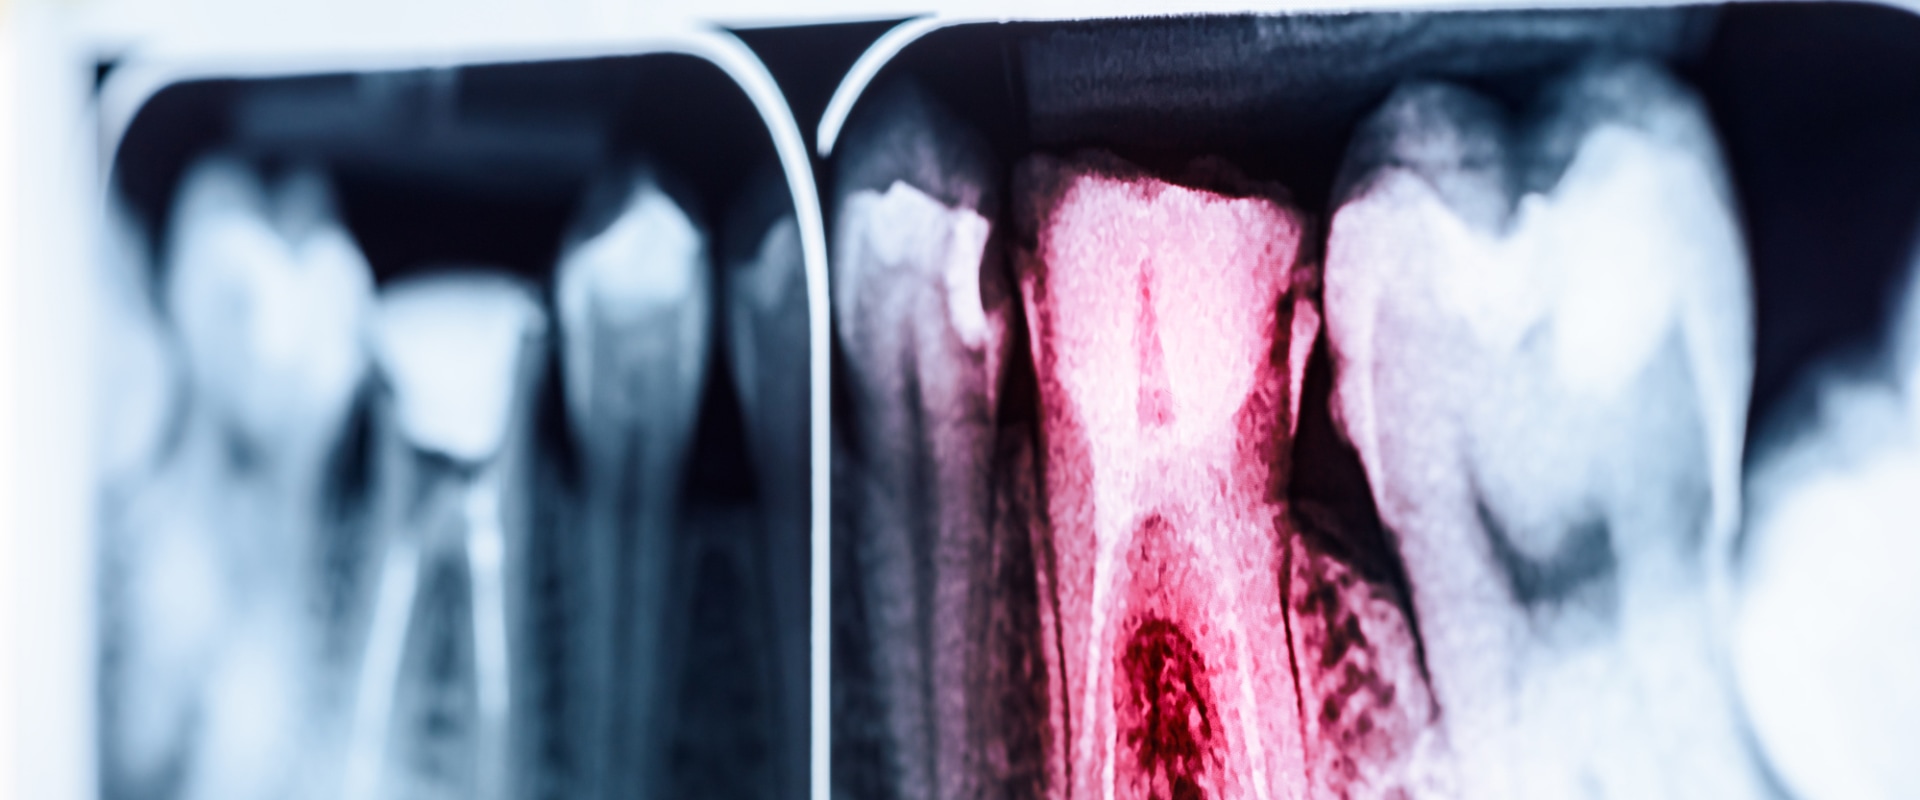 Signs that a Root Canal May Be Necessary